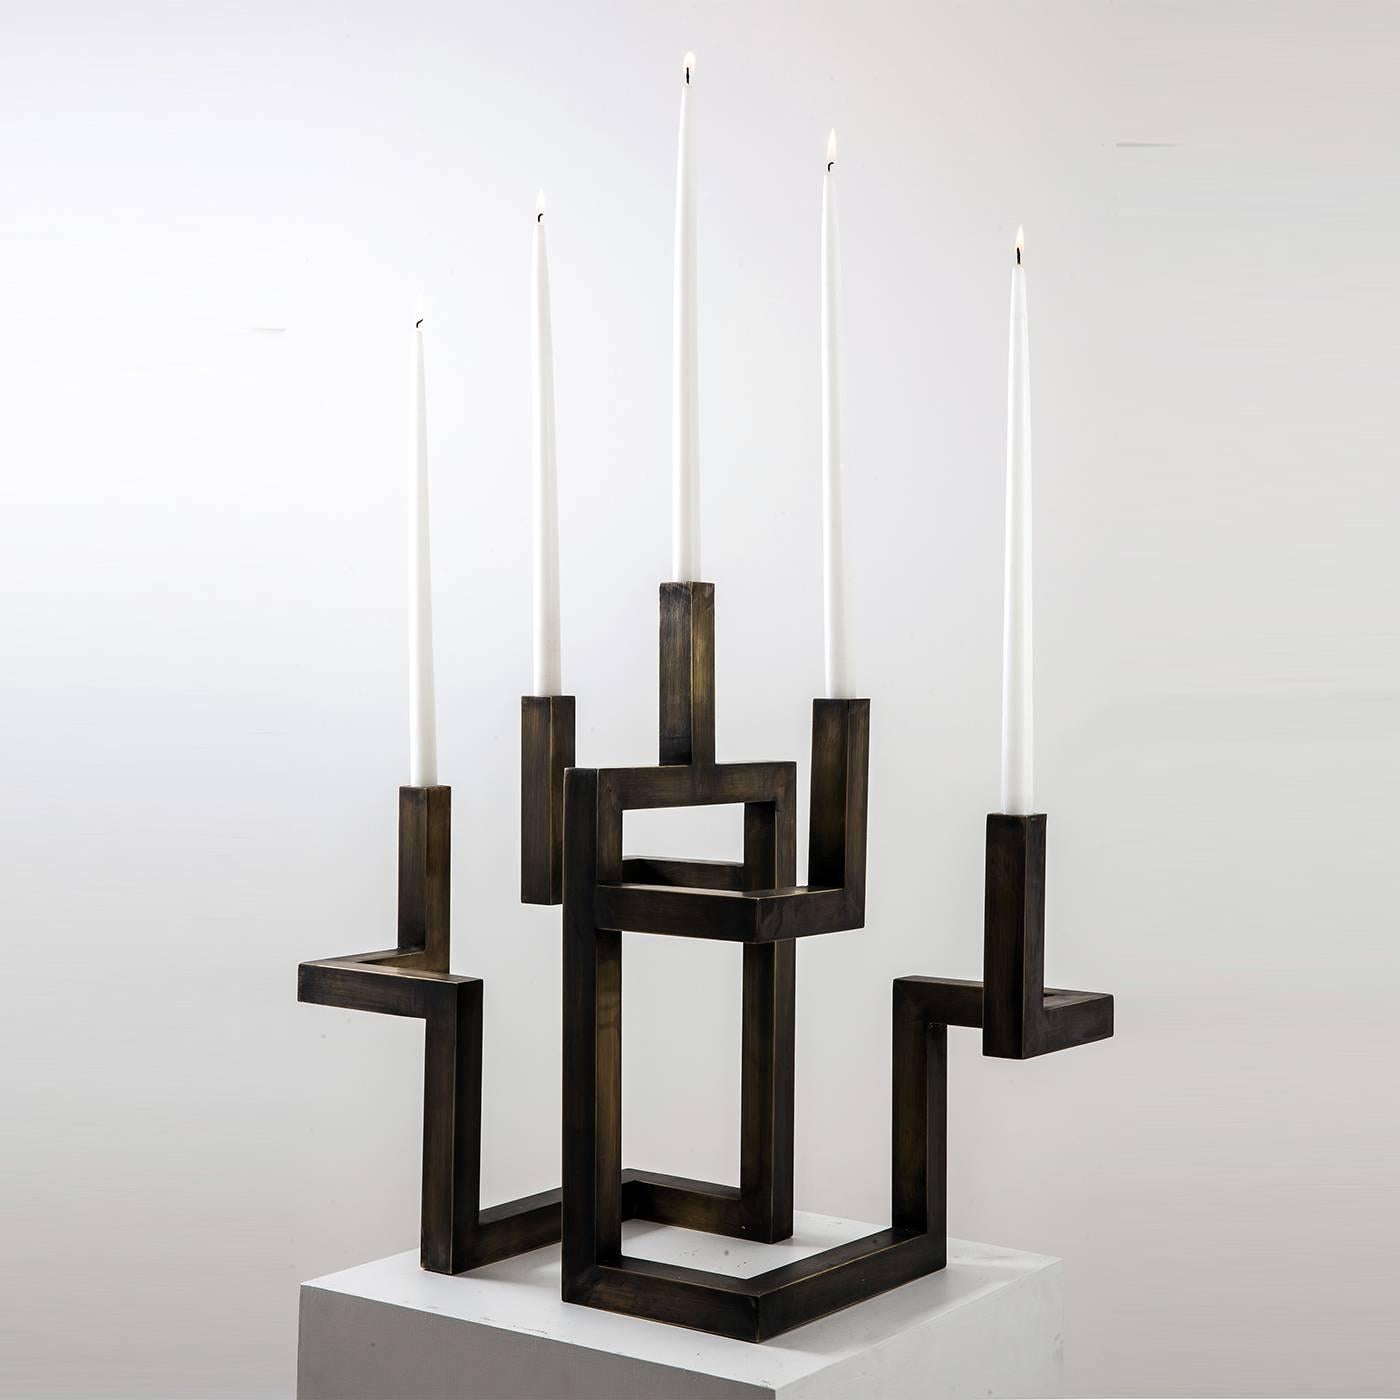 Five arms candelabra in bronzed brass entirely handmade in Italy by skilled artisans in the historical workshops of Rua Catalana in Naples. Its shape is a signature style by Neapolitan designer Francesco Della Femina, who conceived the piece as a a